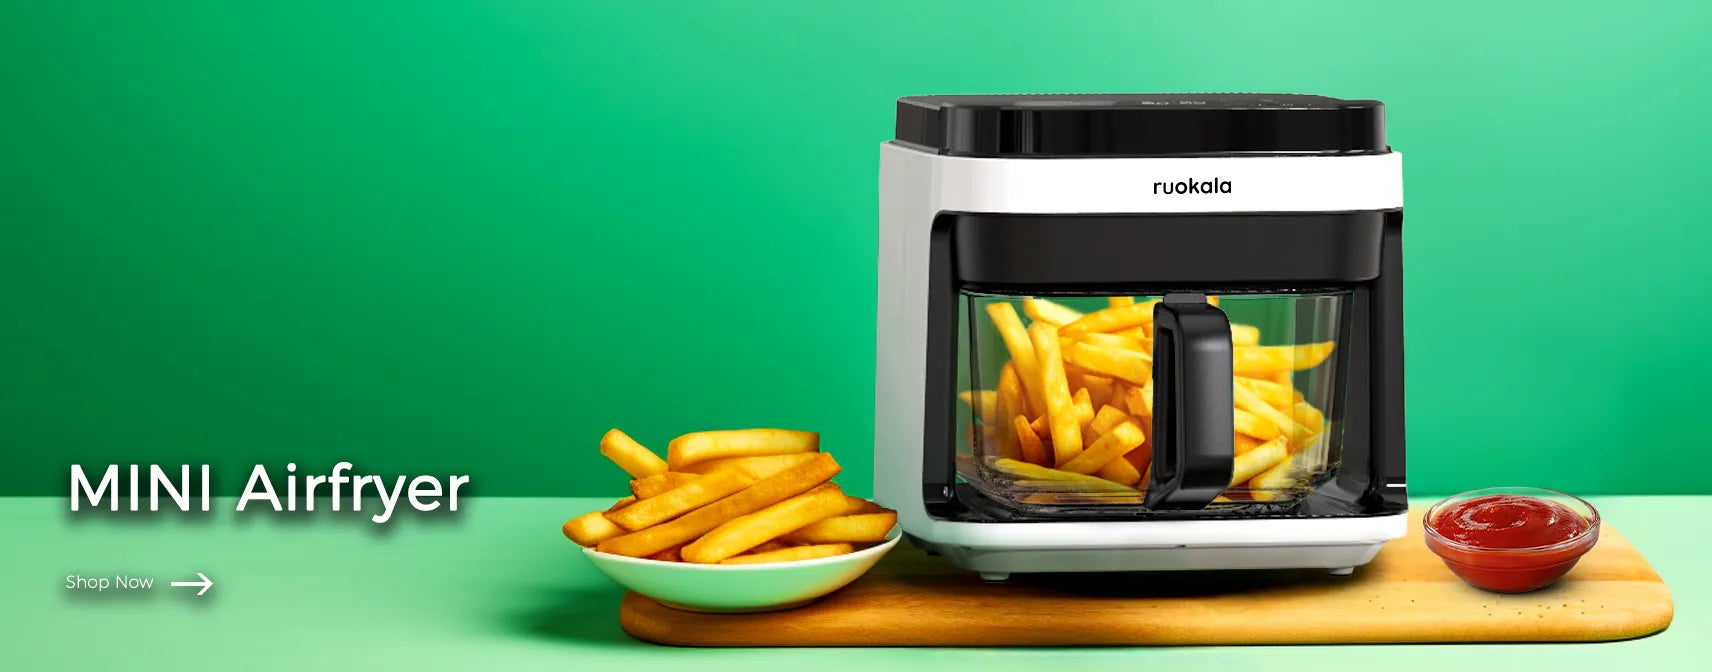 Ruokala MINI Airfryer serving up crispy fries, perfect for snack time